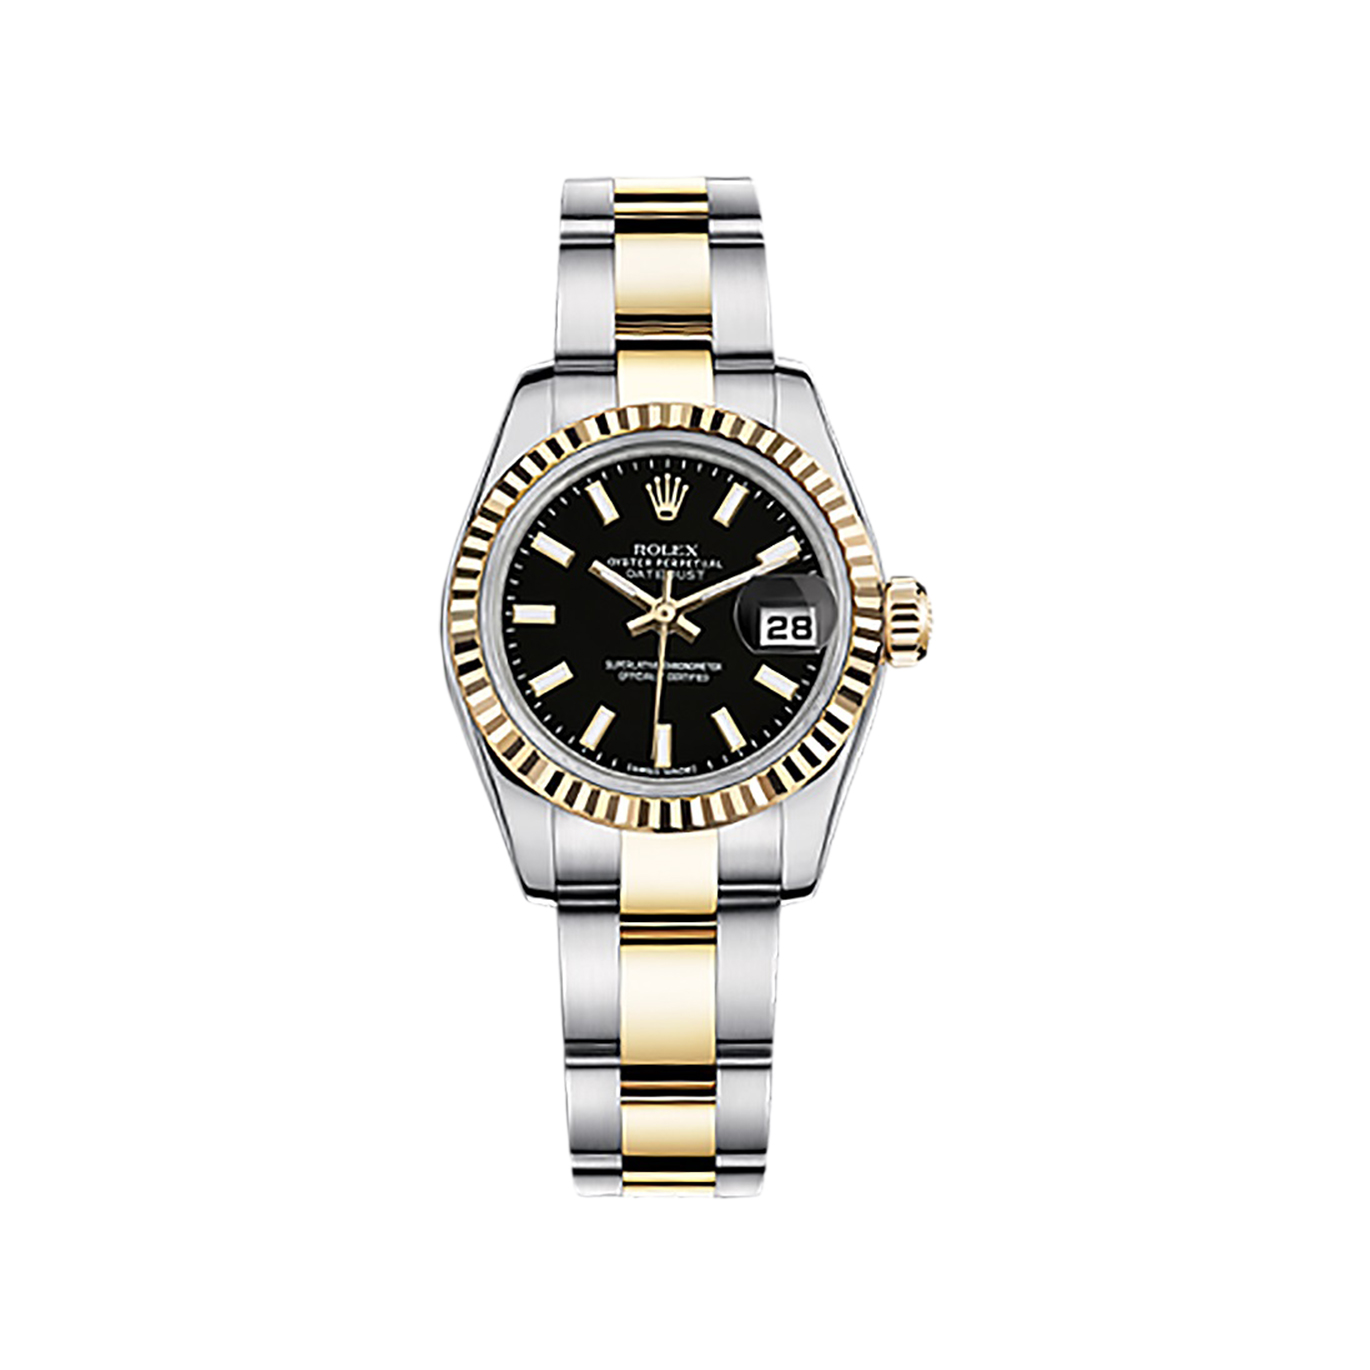 Lady-Datejust 26 179173 Gold & Stainless Steel Watch (Black)